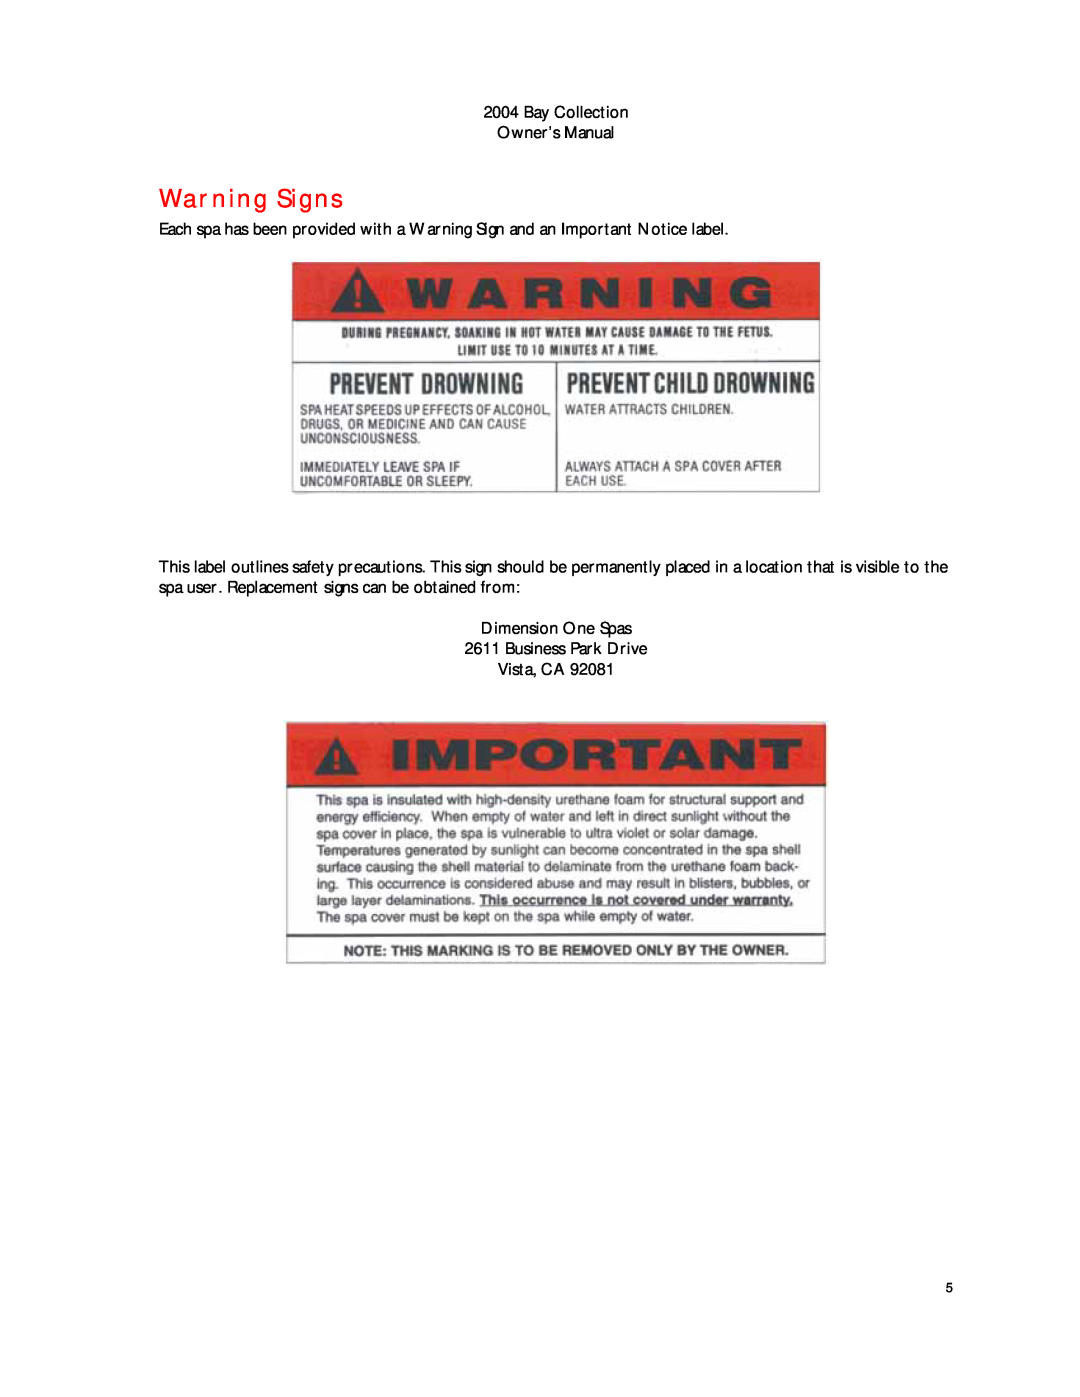 Dimension One Spas Warning Signs, Bay Collection Owner’s Manual, Dimension One Spas 2611 Business Park Drive Vista, CA 